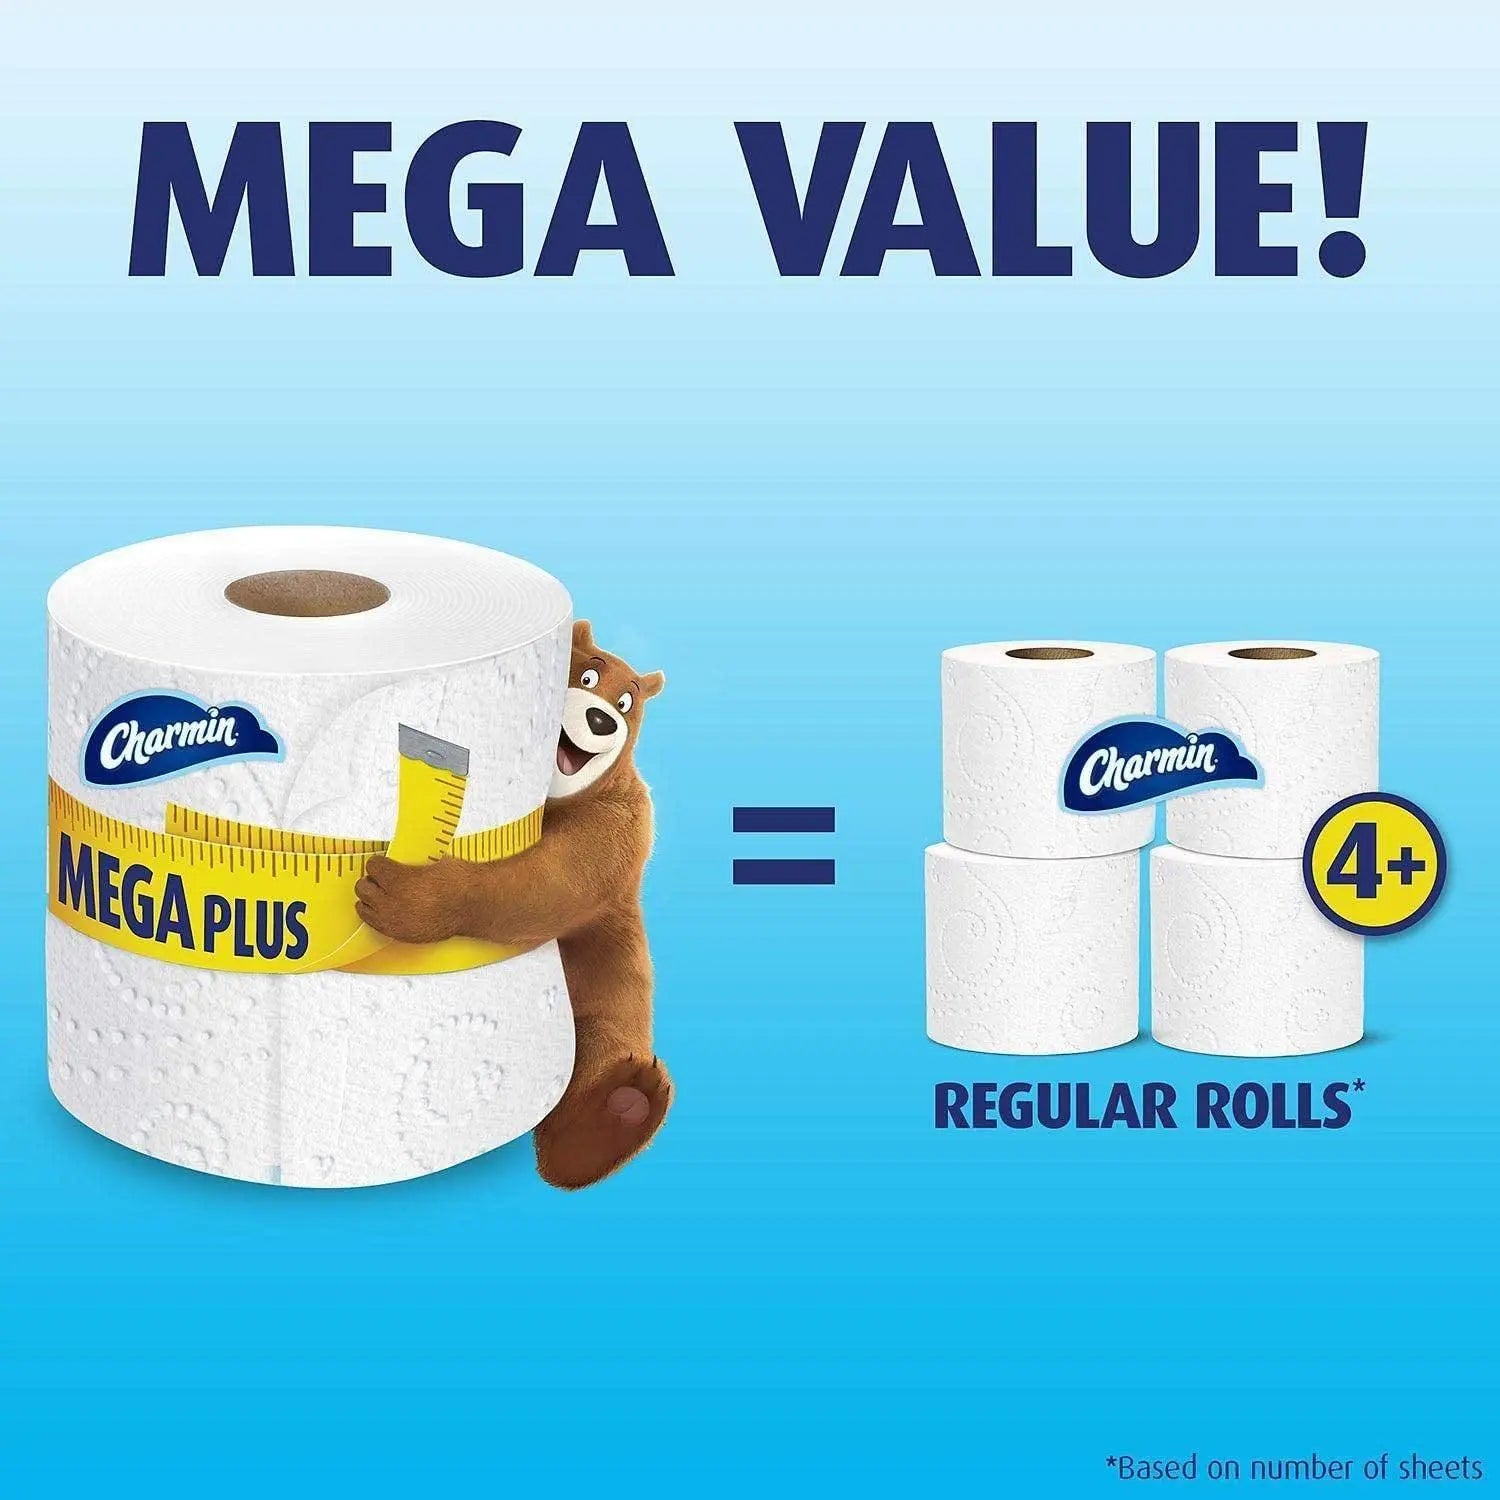 Wholesale prices with free shipping all over United States Charmin Ultra Strong Toilet Paper Bulk Mega Rolls (308 sheets/roll, 24 rolls) - Steven Deals